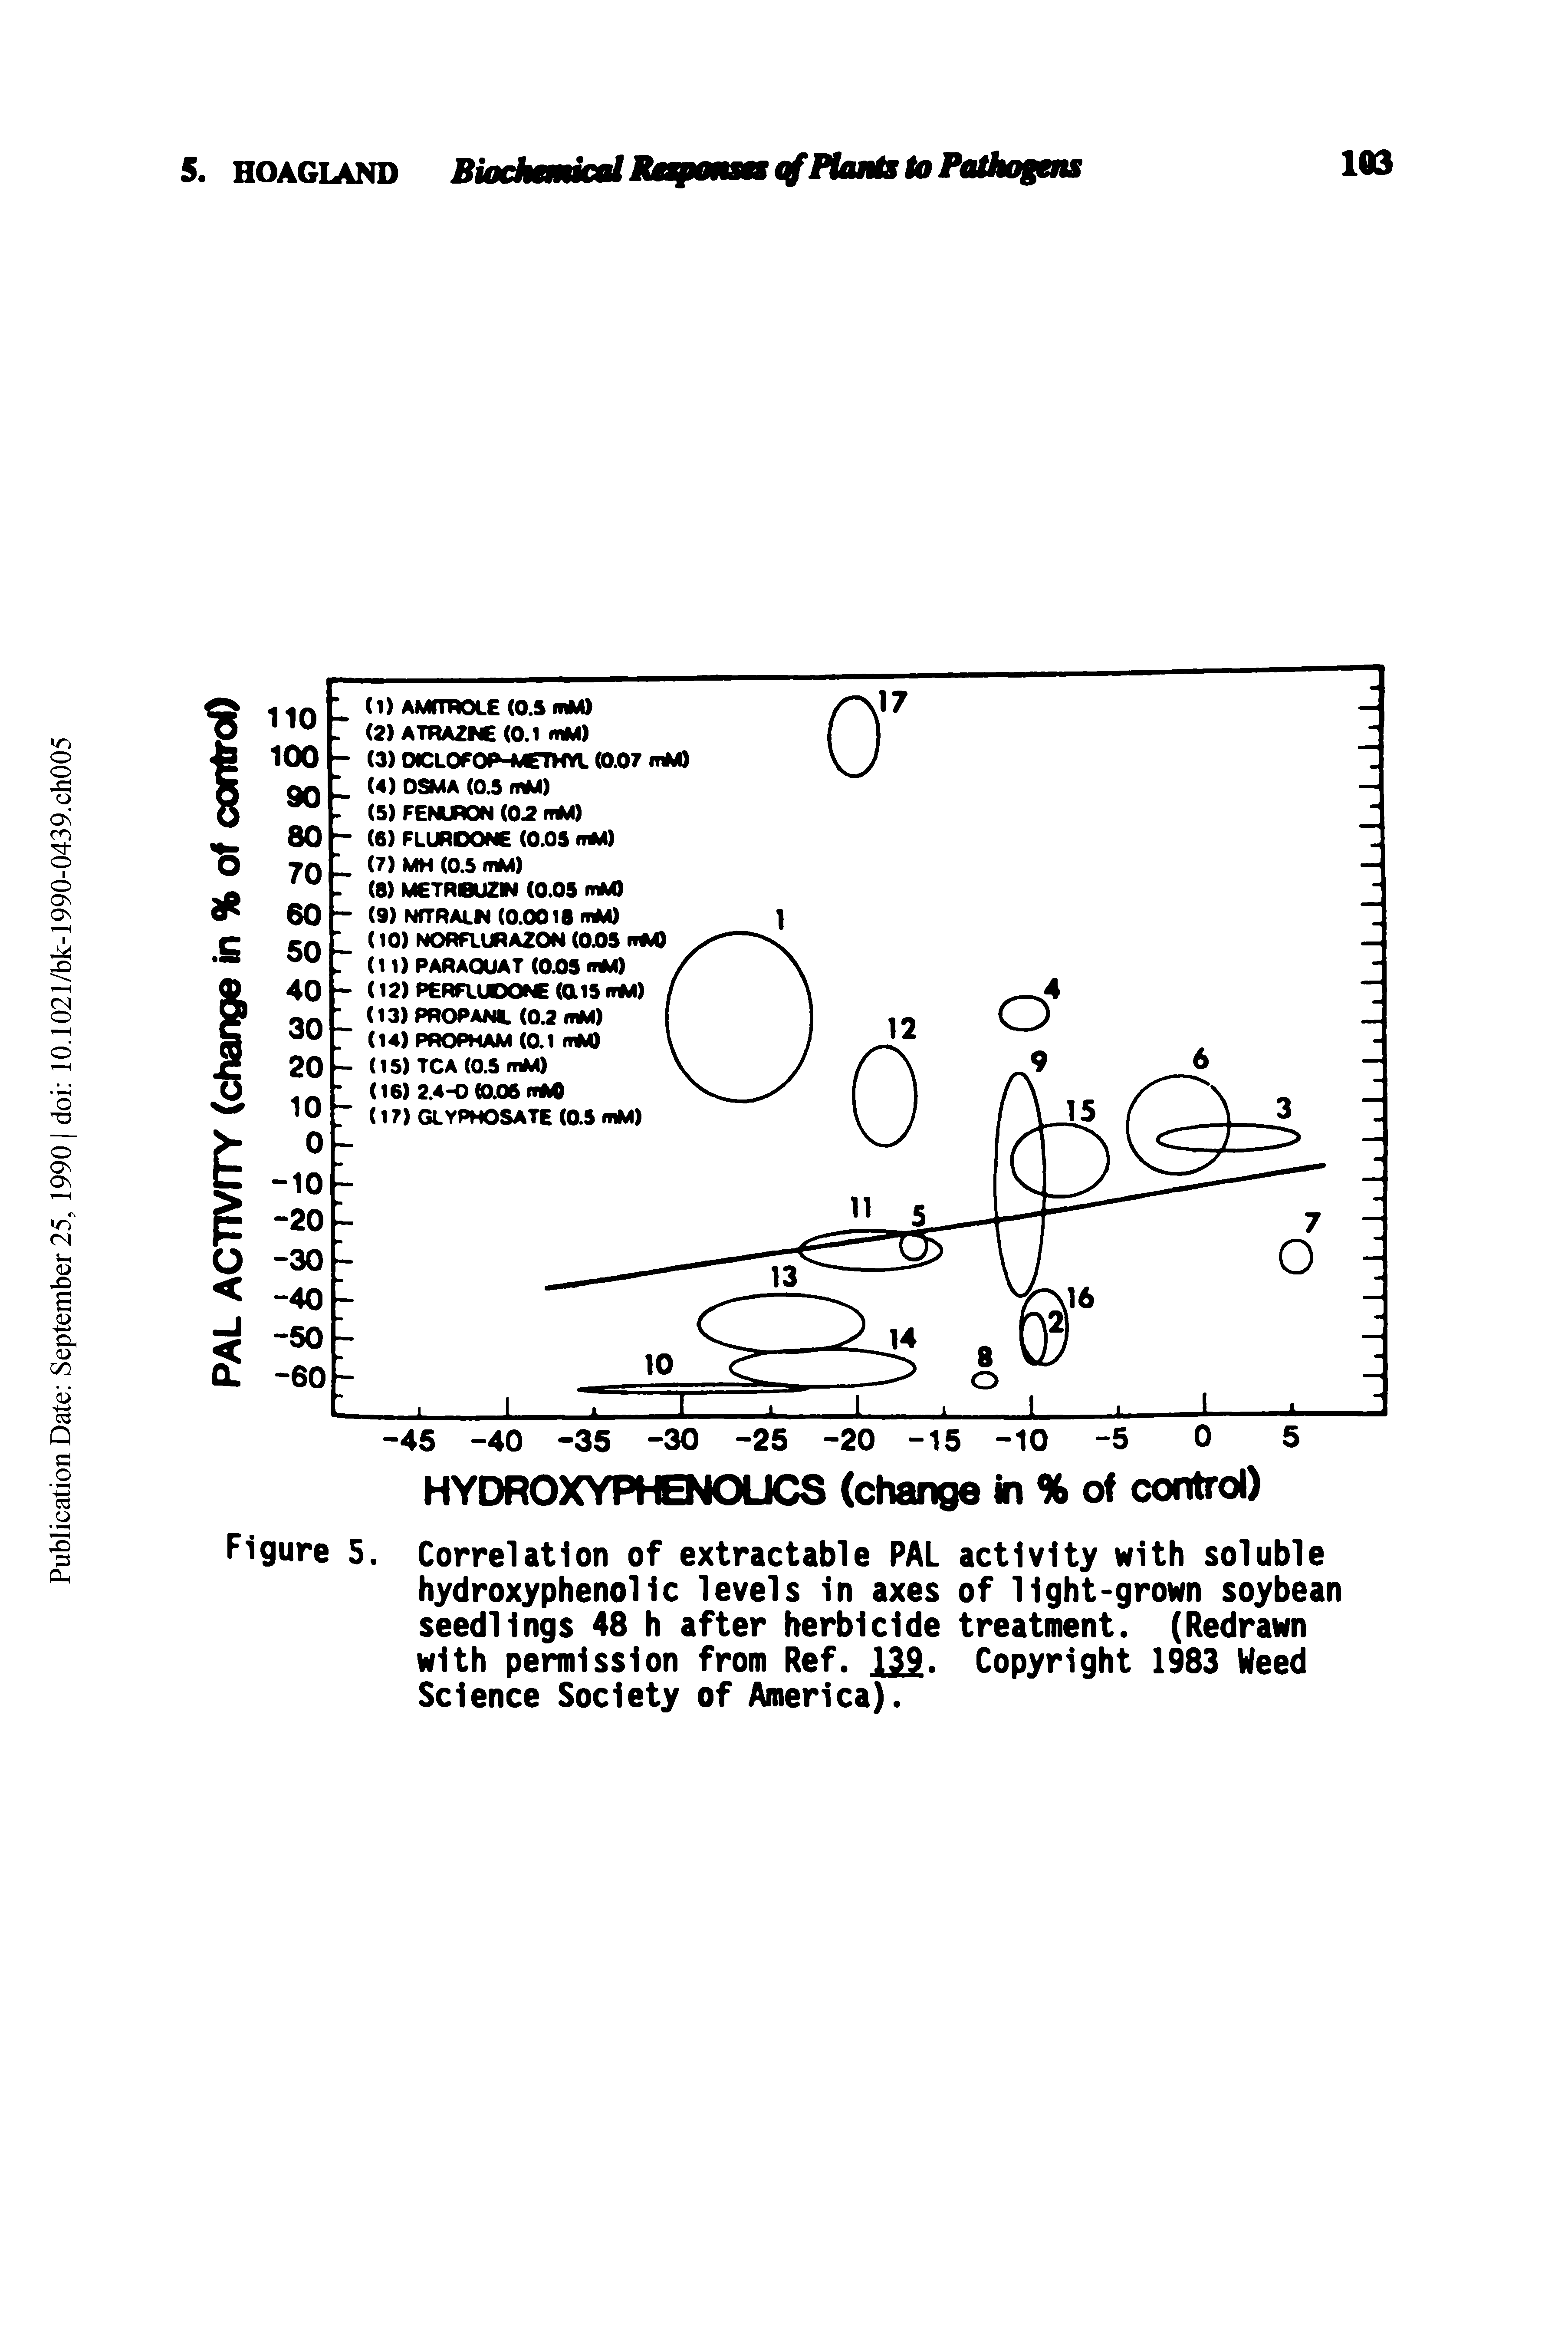 Figure 5. Correlation of extractable PAL activity with soluble hydroxyphenollc levels In axes of light-grown soybean seedlings 48 h after herbicide treatment. (Redrawn with permission from Ref. 122. Copyright 1983 Weed Science Society of America).